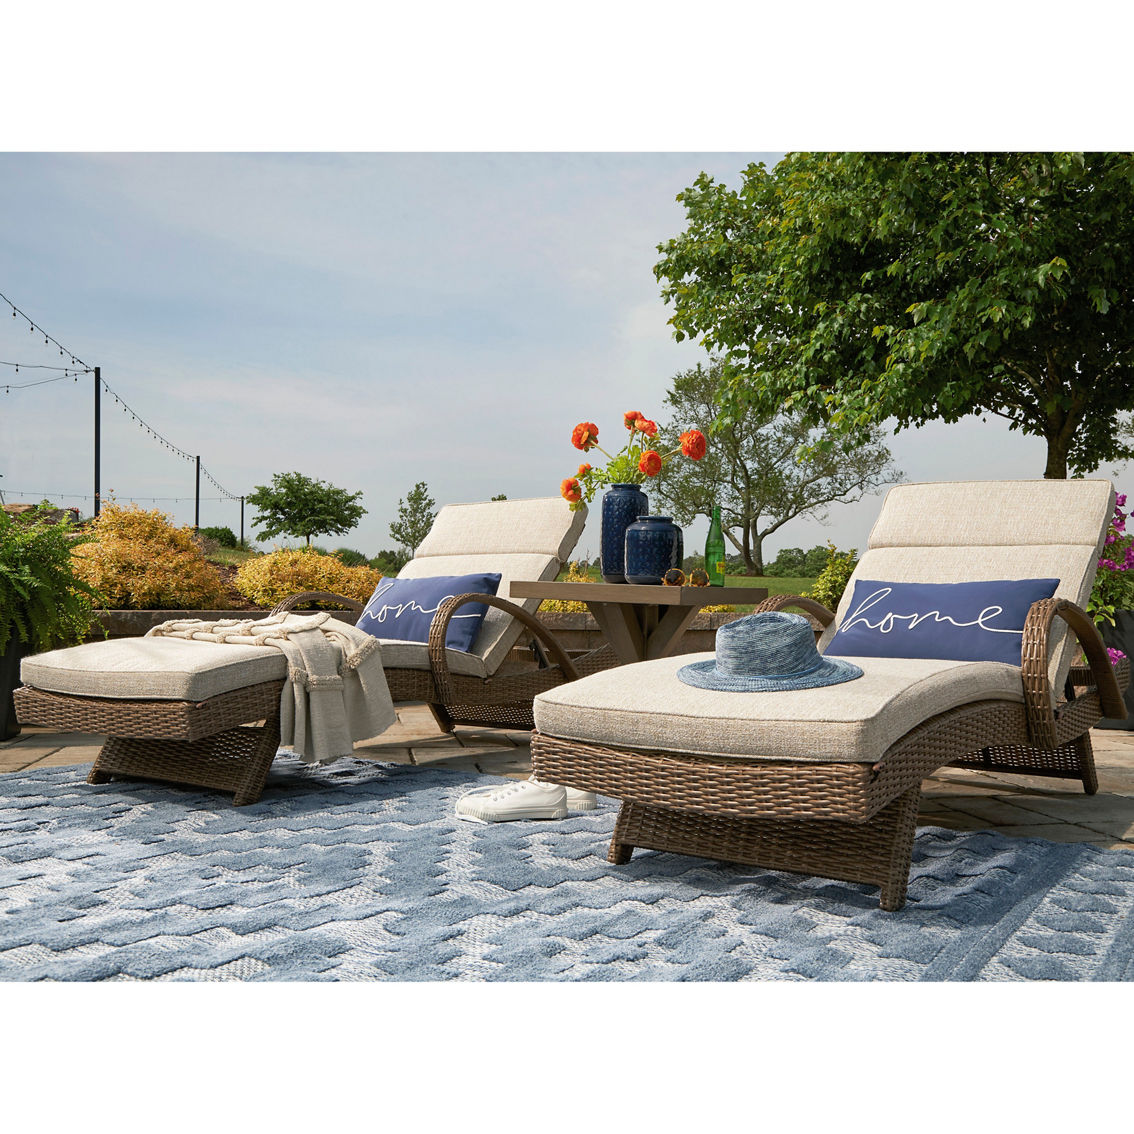 Signature Design by Ashley Beachcroft Outdoor Chaise Lounge with Cushion - Image 4 of 4